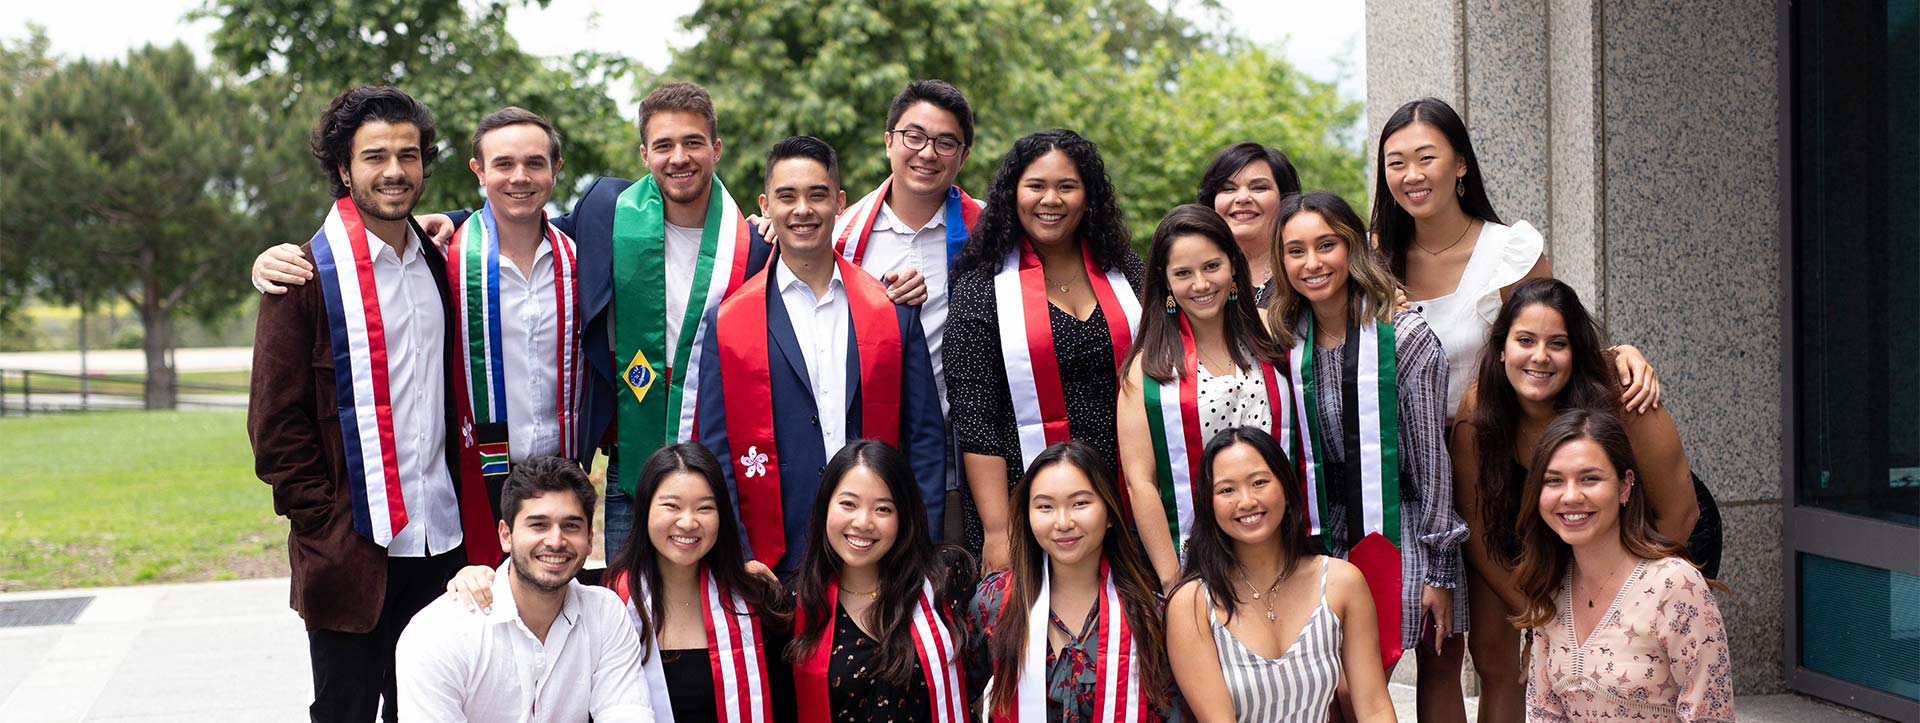 Group of international students wearing sashes representing their countries of orgin